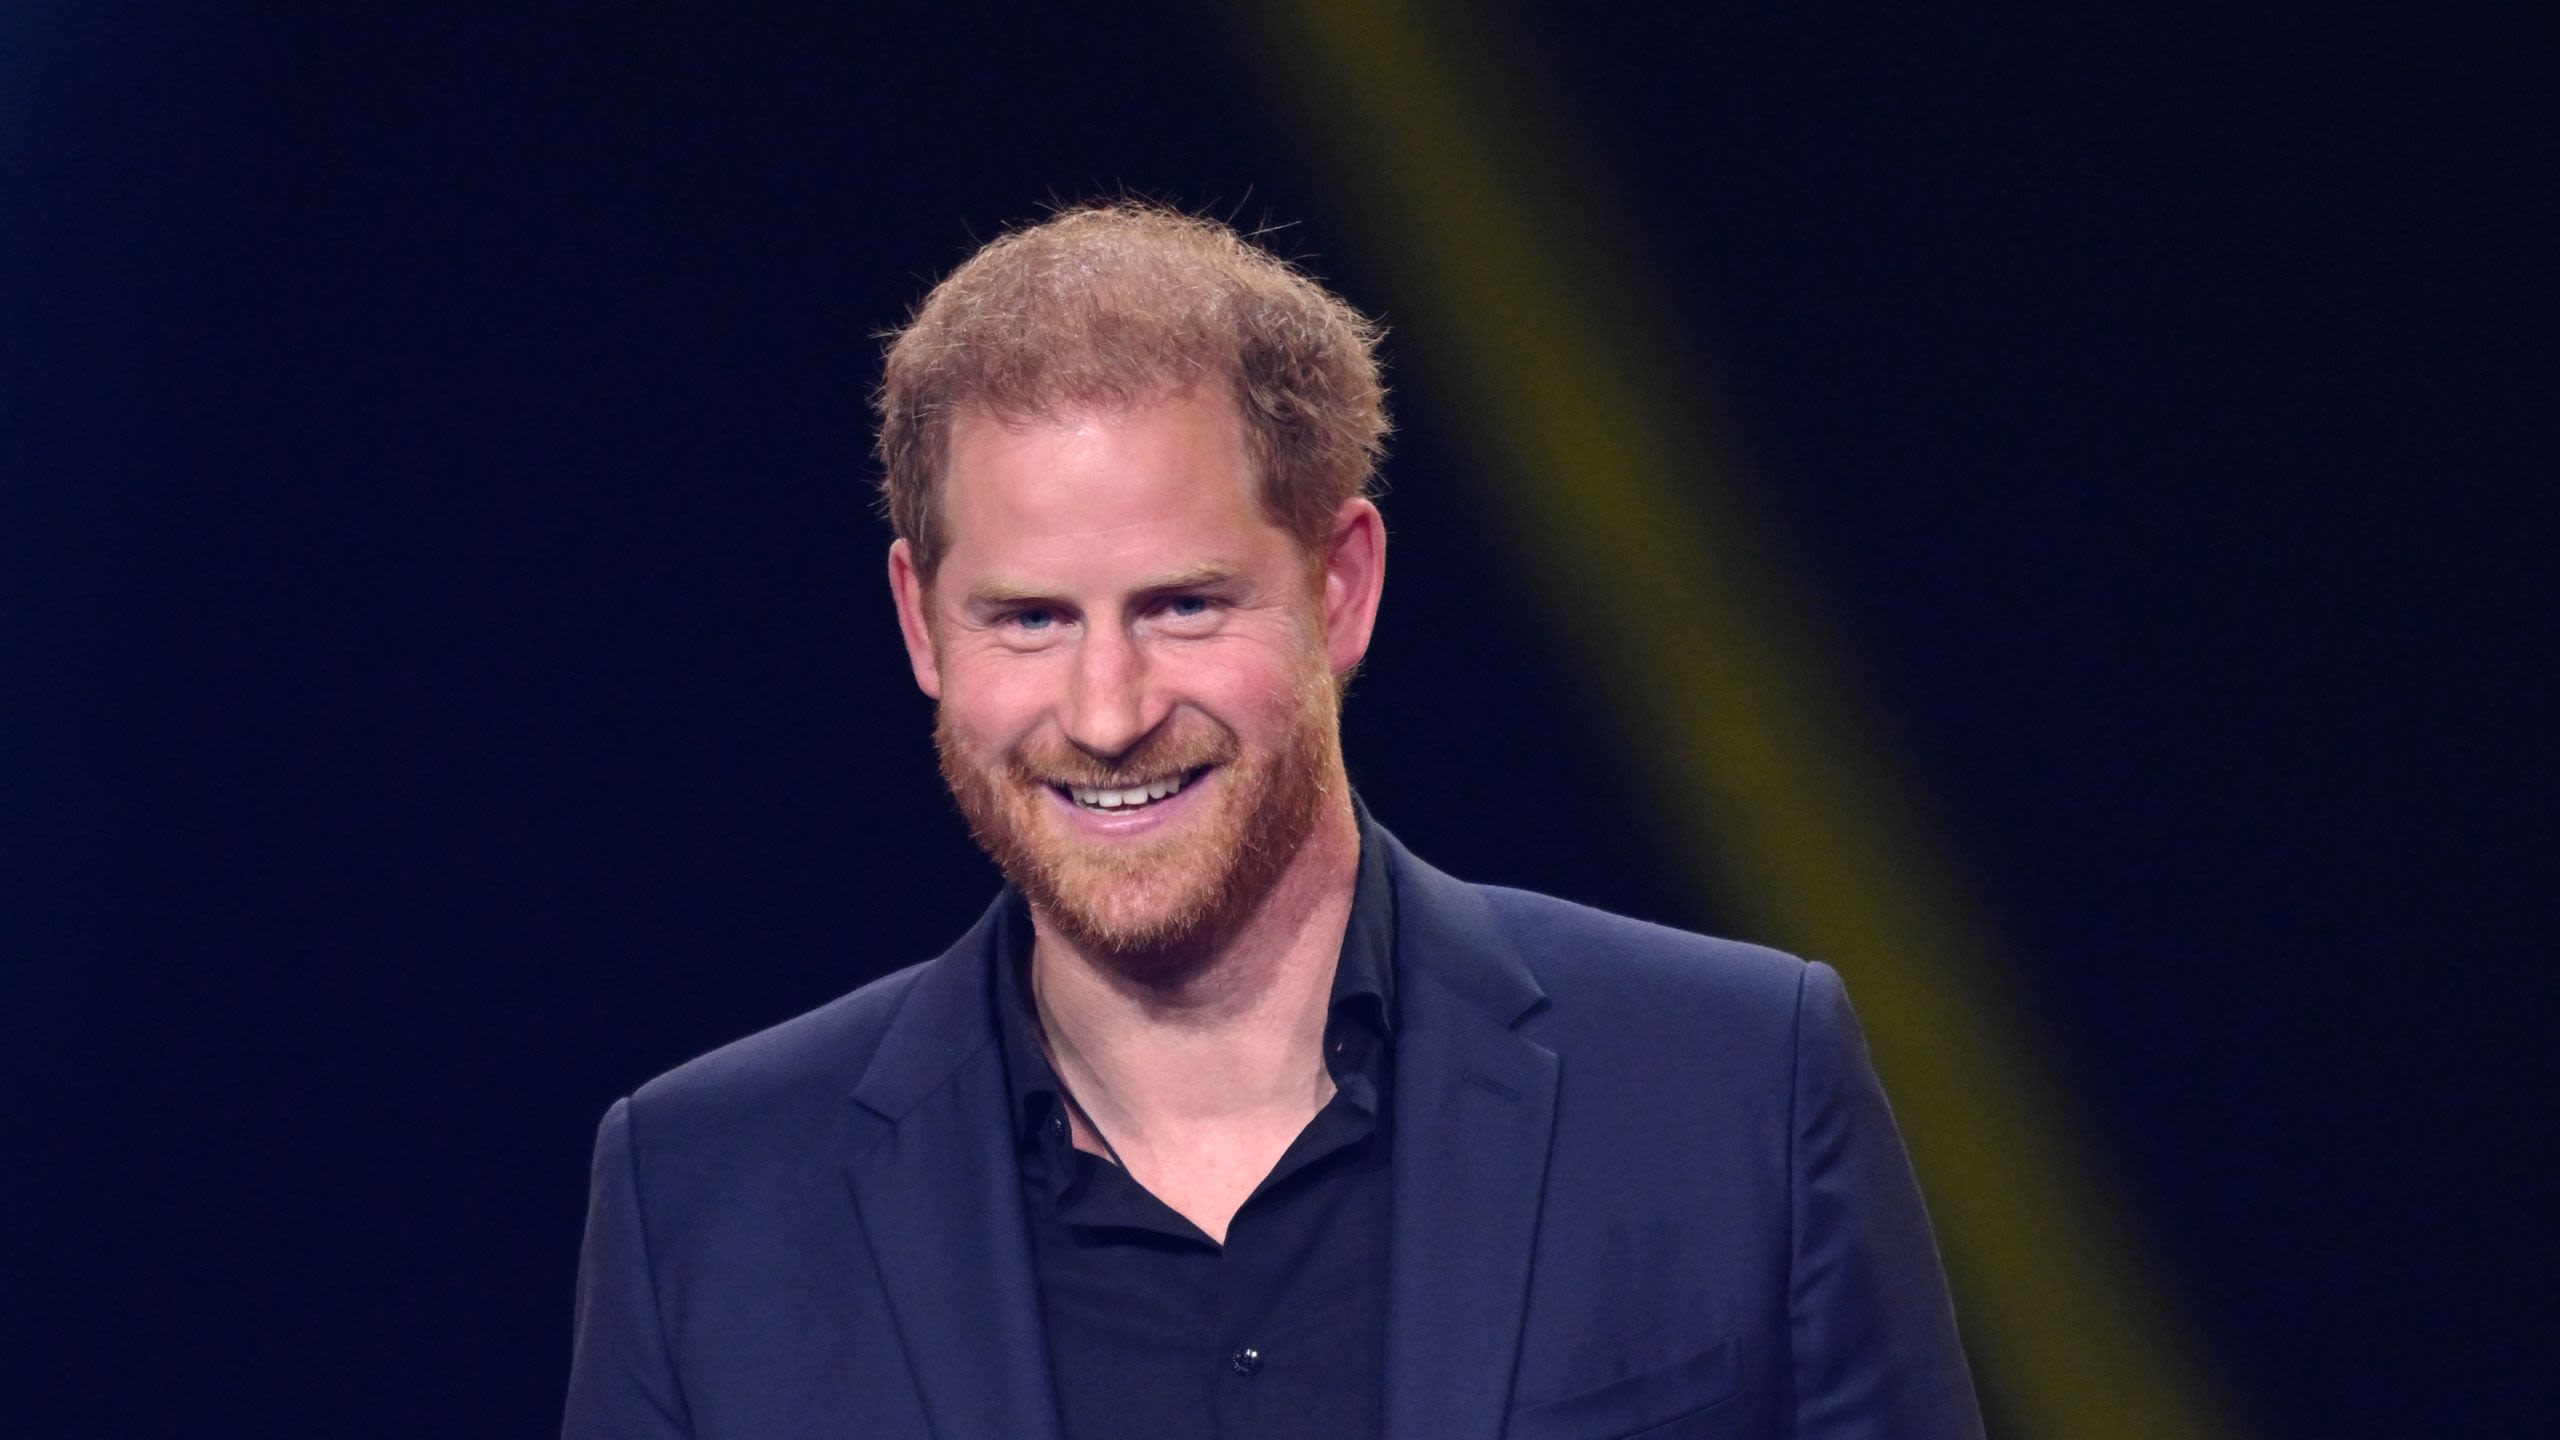 Prince Harry to Receive ESPY Award for His Work With the Invictus Games